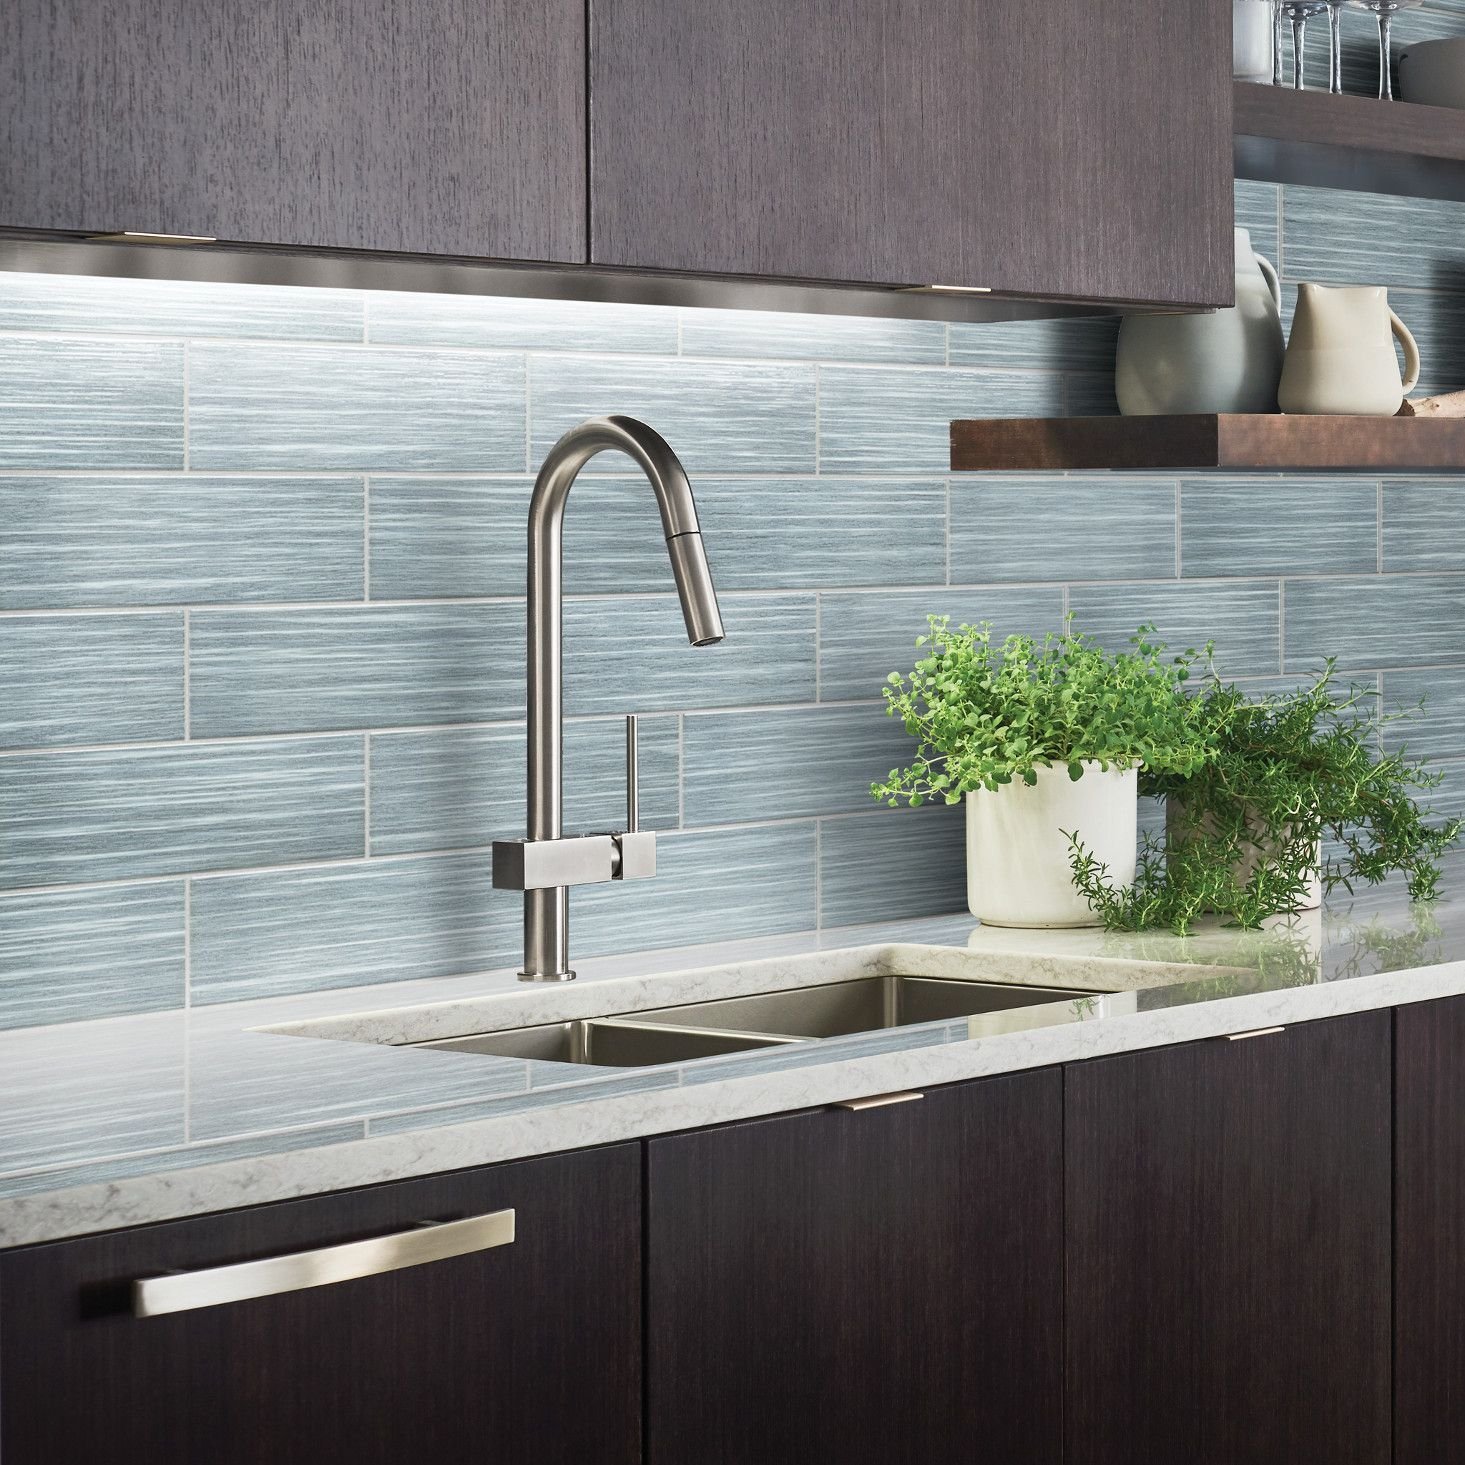 Kitchen with blue tiled backsplash from 180 Degree Floors in the Nashville, TN area